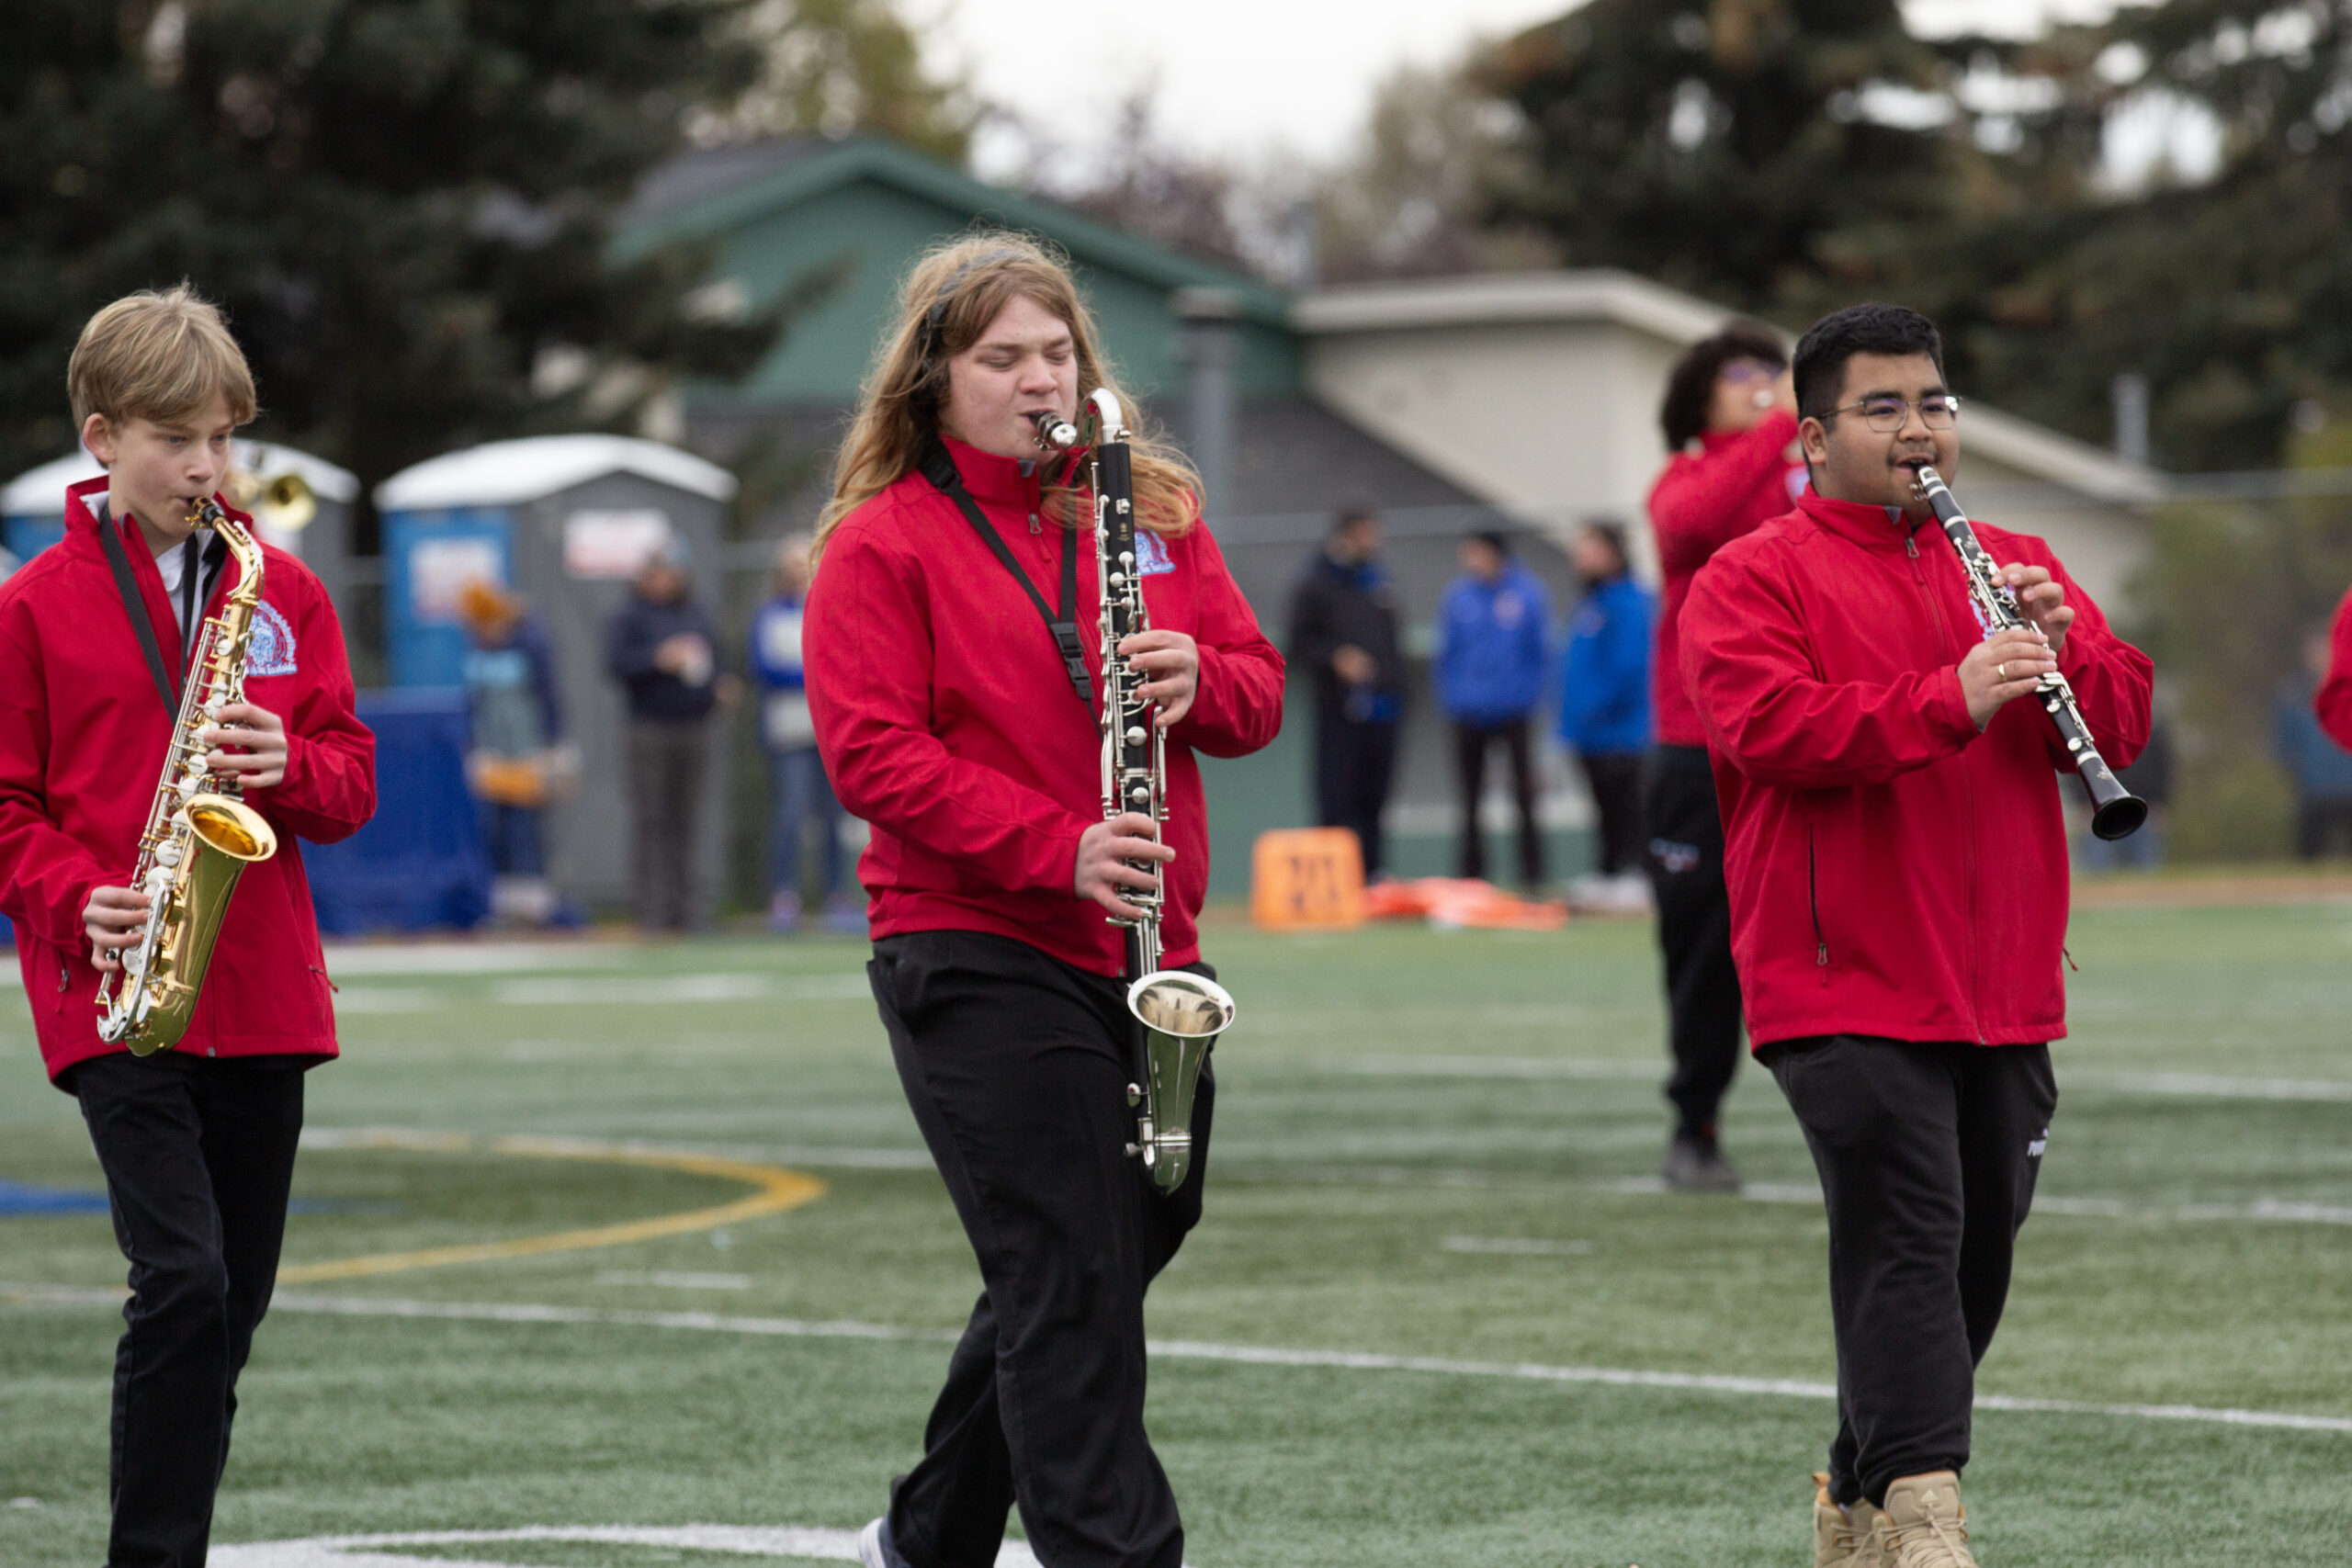 Students in red jackets march and play instruments on a football field (Shiri Segal/Alaska Public Media)